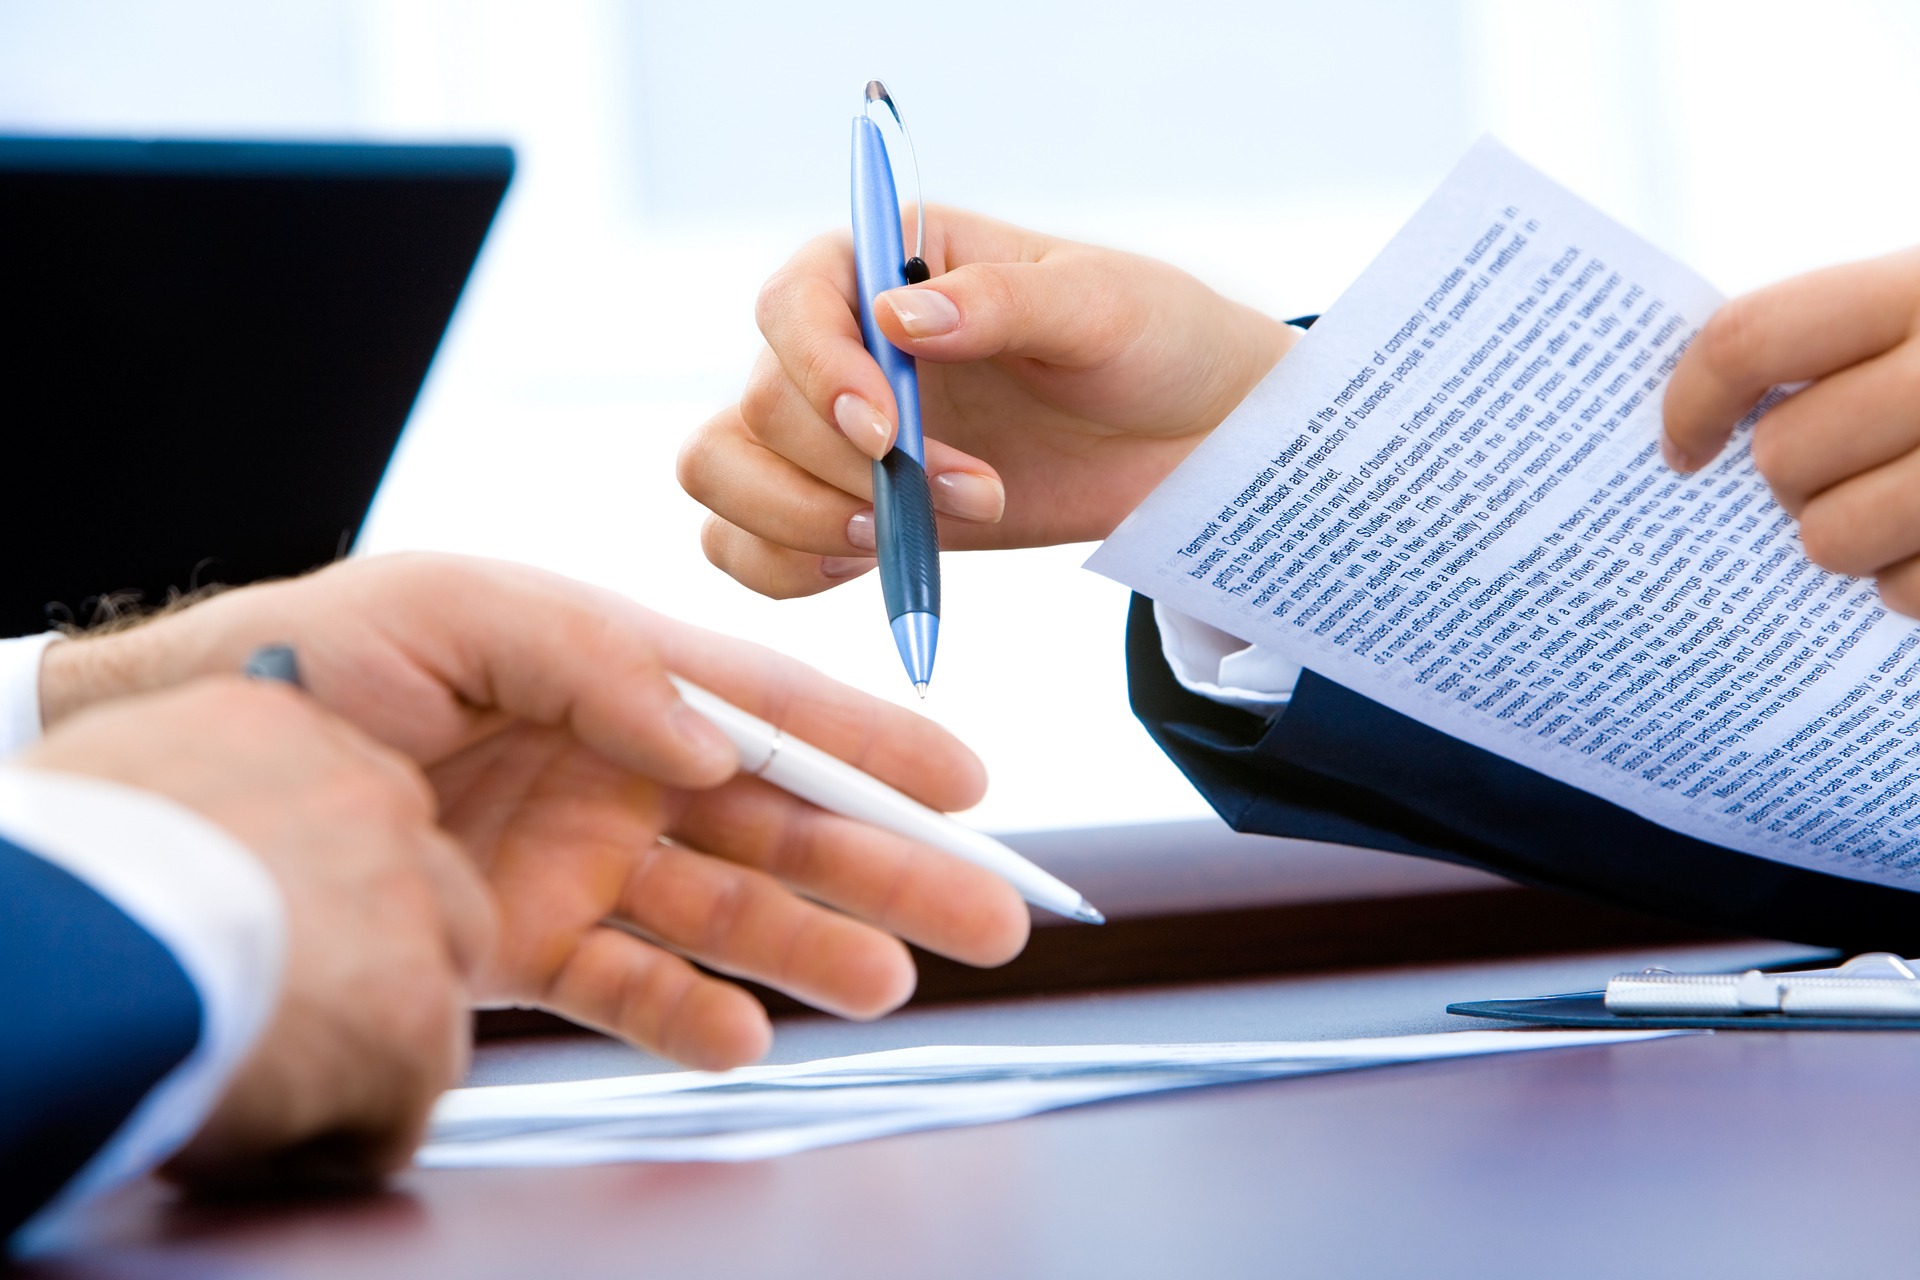 Two professionals at a table reviewing and discussing an insourcing knowledge document; one is pointing at the paper with a pen.